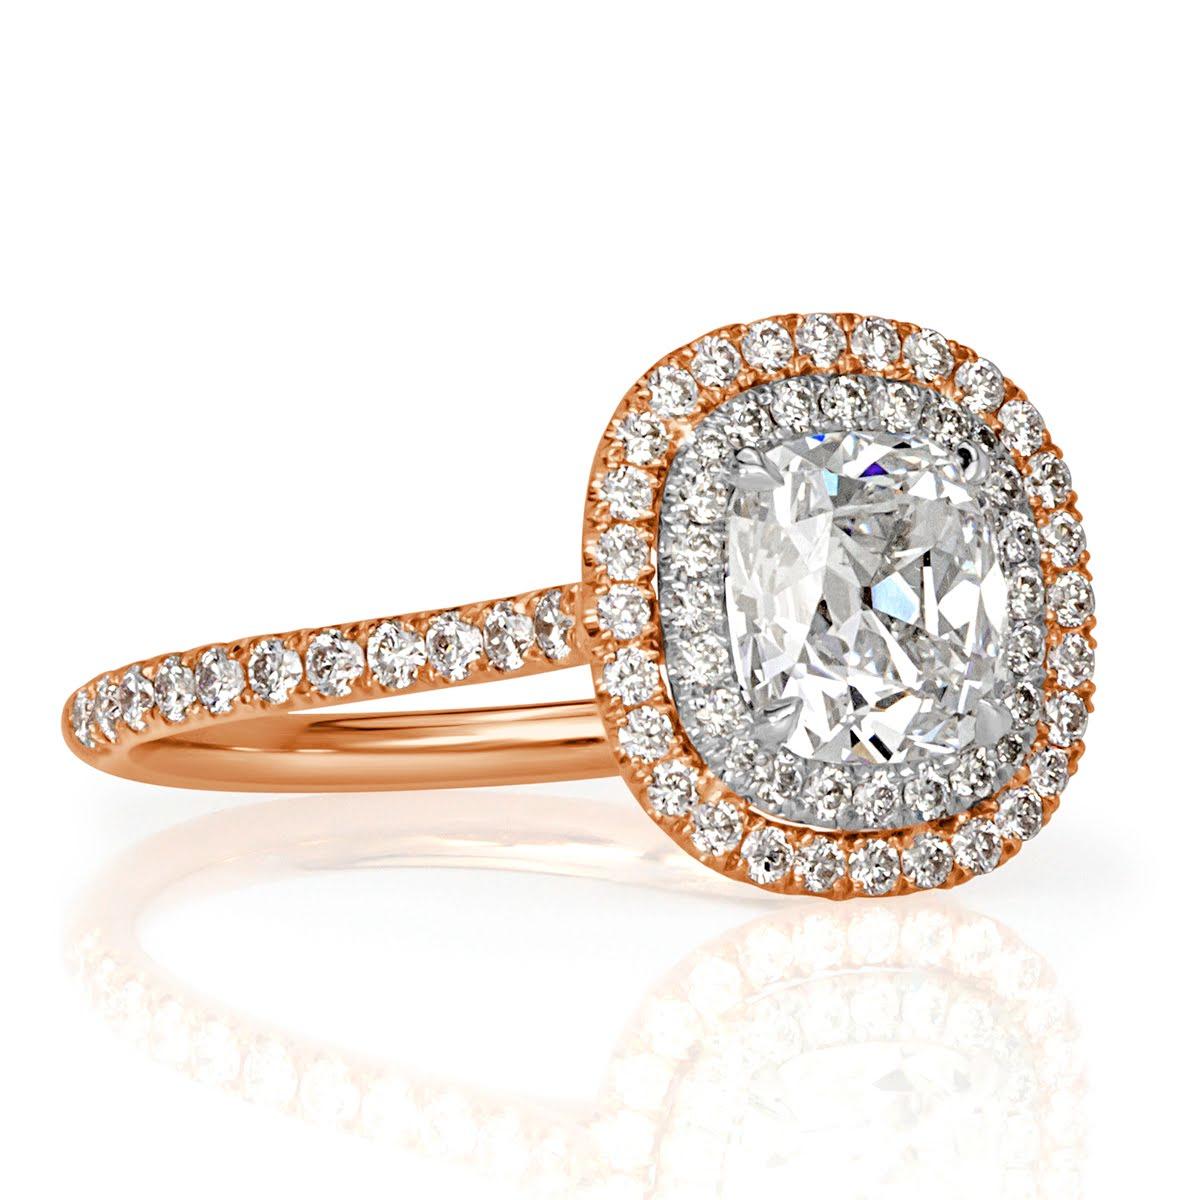 This mesmerizing diamond engagement ring features a beautiful 1.20ct old Mine cut center diamond, GIA certified at H in color, SI1 in clarity. It is encased in a double halo of round brilliant cut diamonds and accented by gleaming diamonds set on